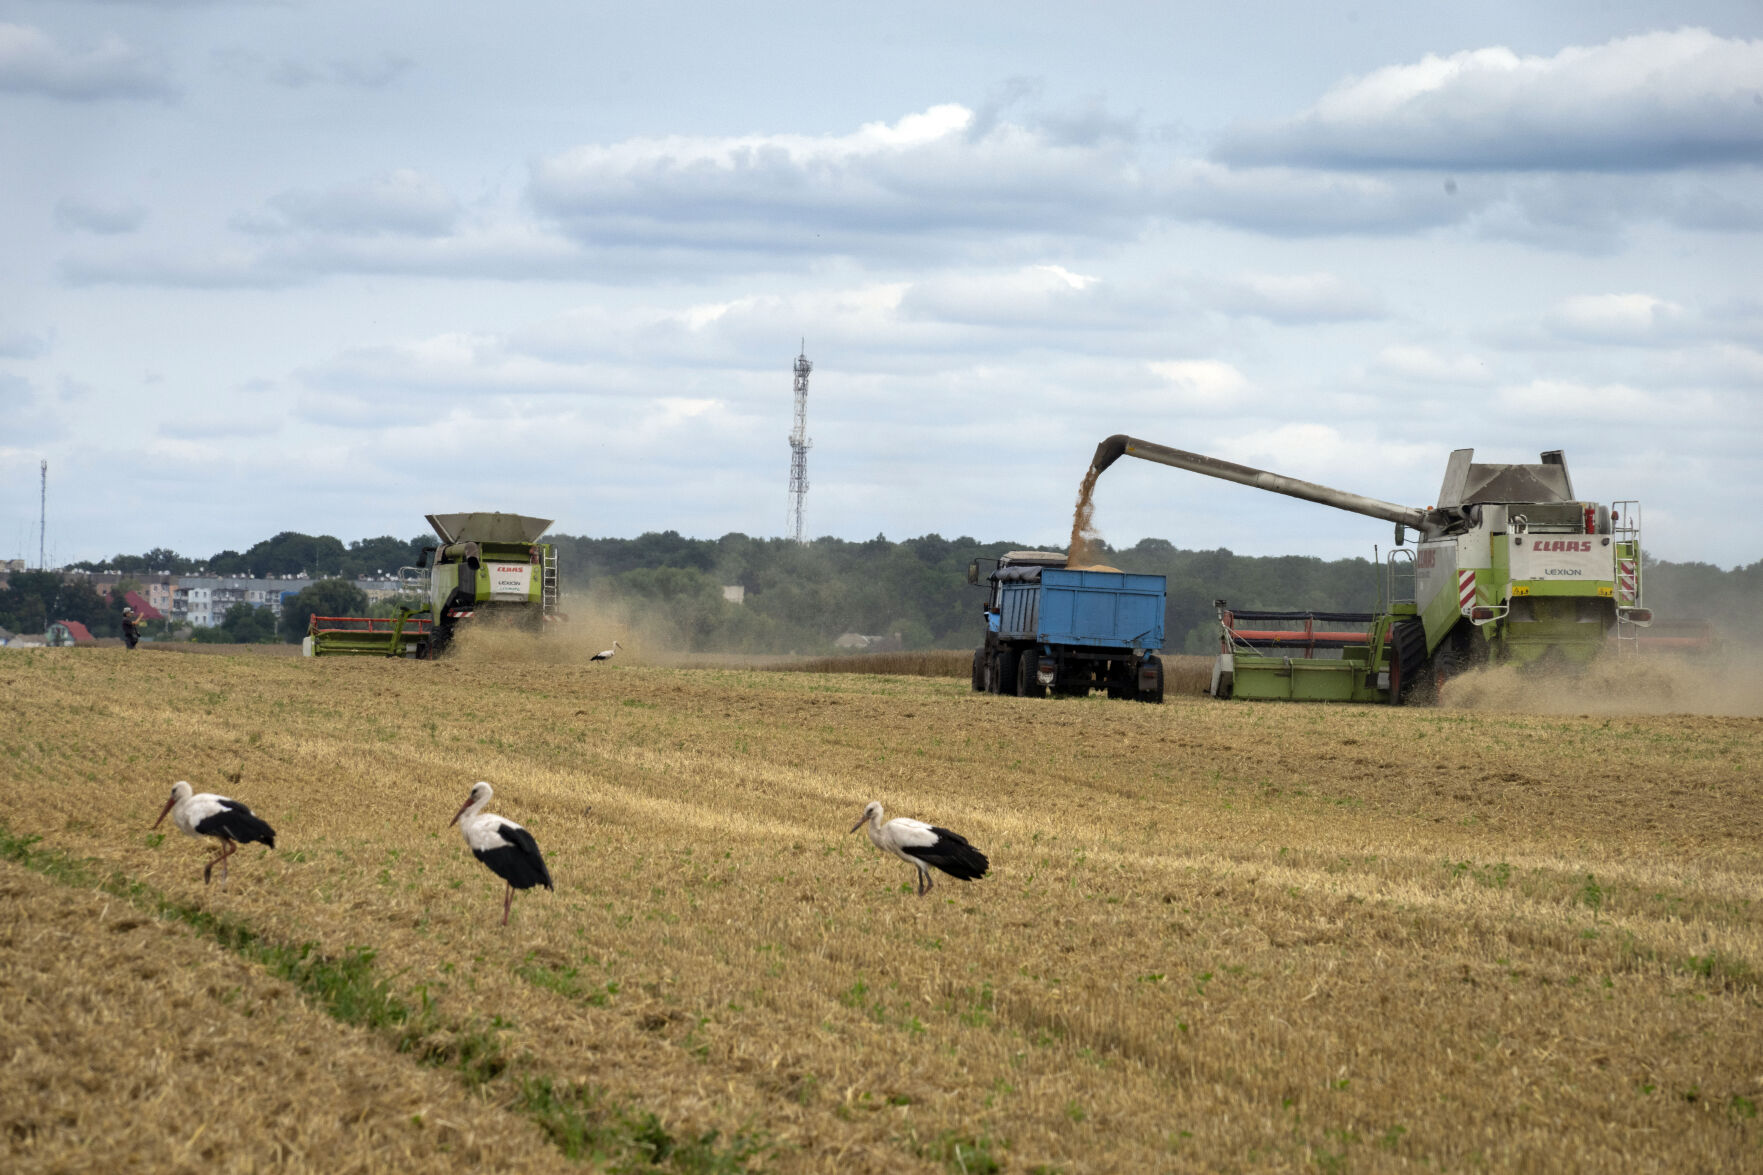 <p>FILE - Storks walk in front of harvesters in a wheat field in the village of Zghurivka, Ukraine, on Aug. 9, 2022. Russia said Monday July 17, 2023 it has halted an unprecedented wartime deal that allows grain to flow from Ukraine to countries in Africa, the Middle East and Asia where hunger is a growing threat and high food prices have pushed more people into poverty. (AP Photo/Efrem Lukatsky, File)</p>   PHOTO CREDIT: Efrem Lukatsky 